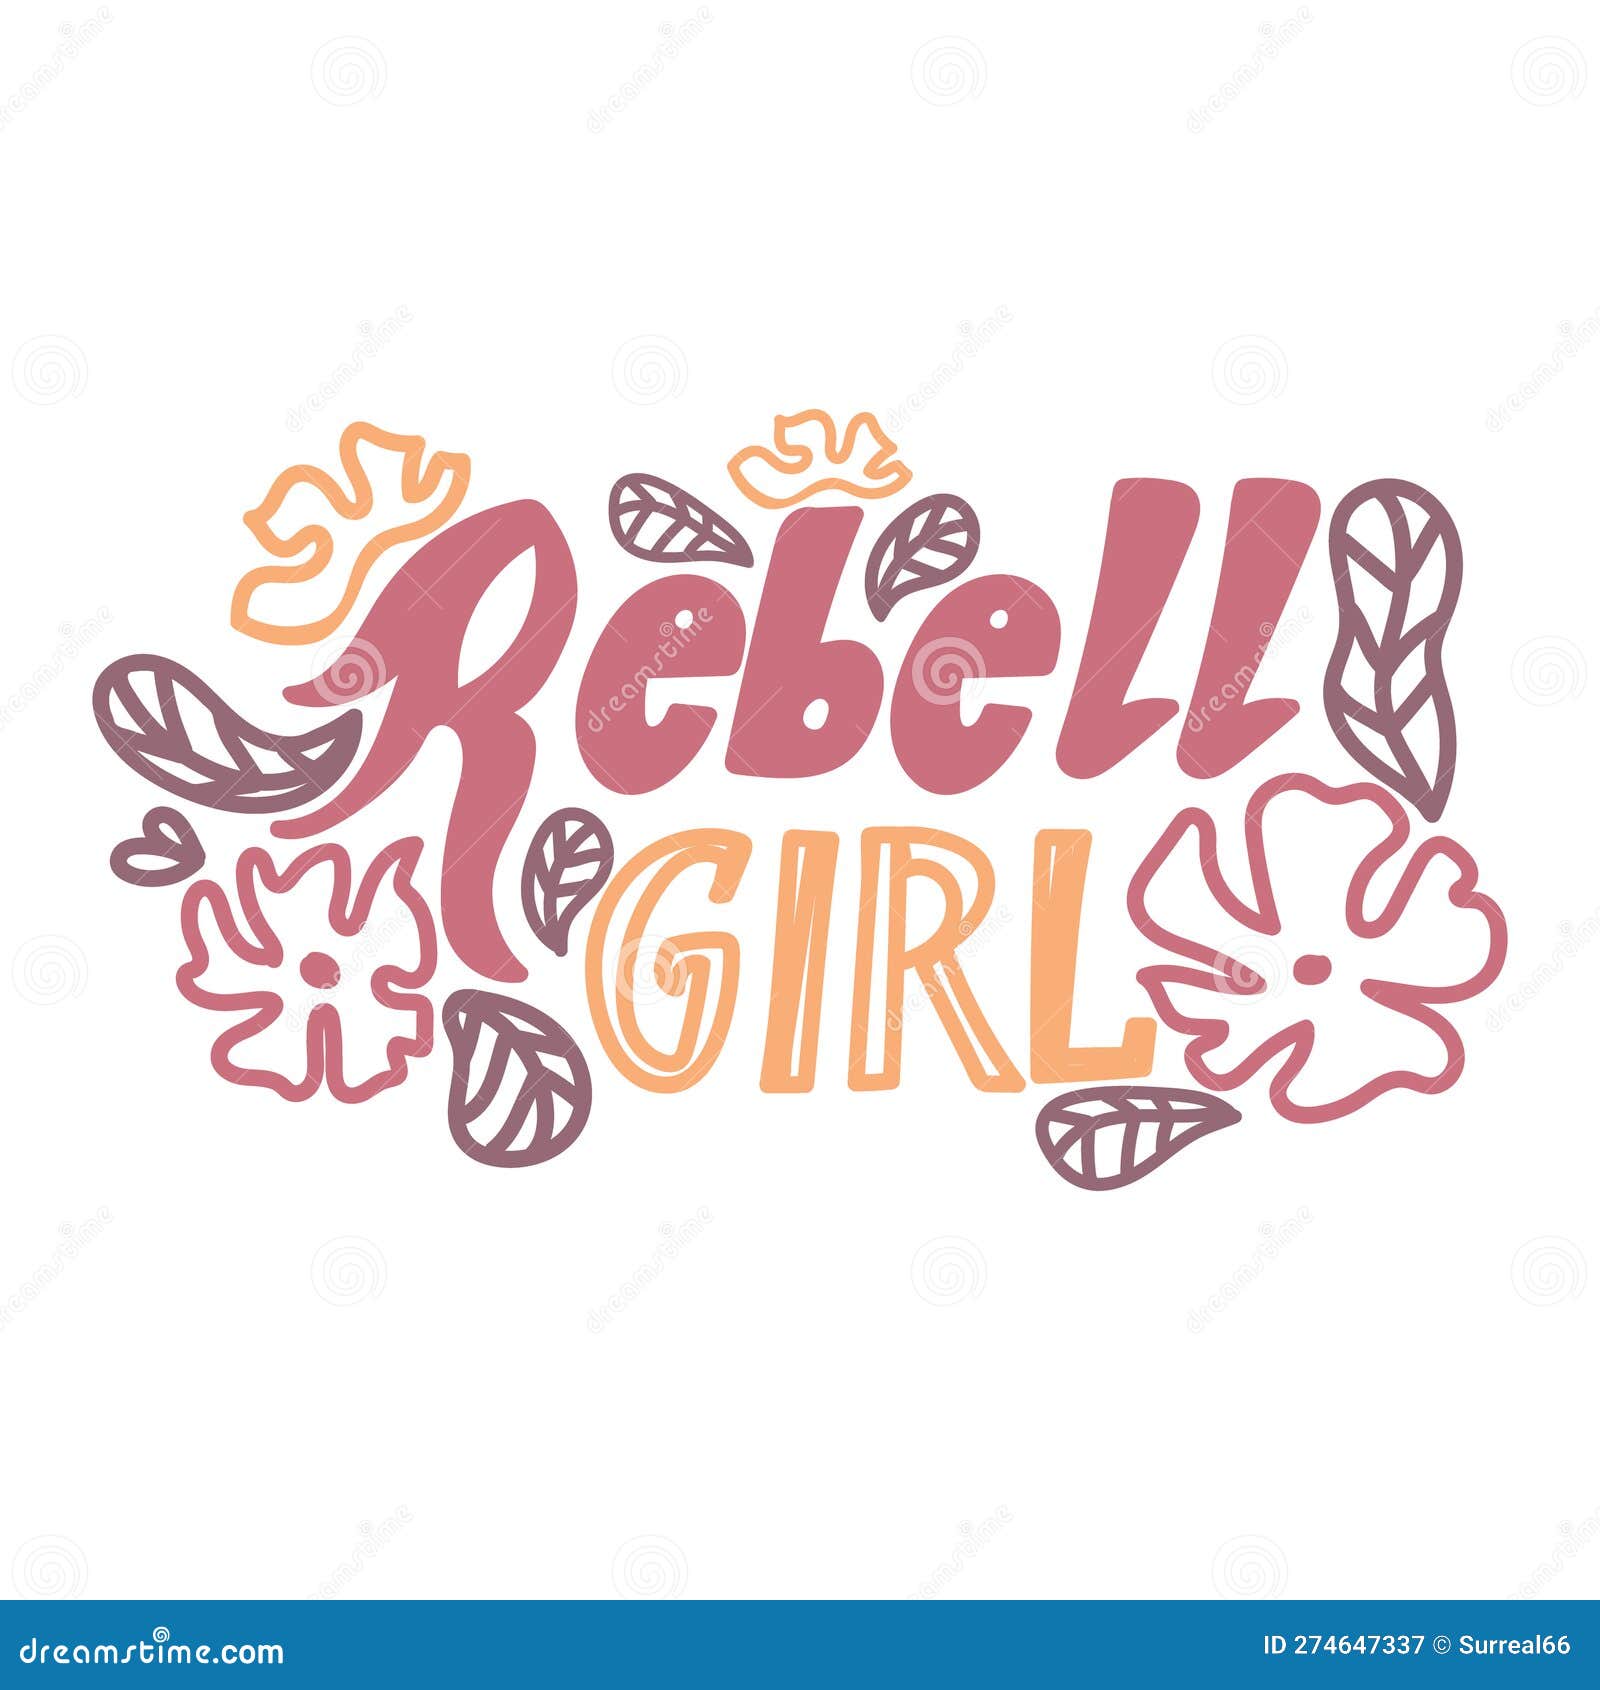 rebell girl  hand drawn quote lettering